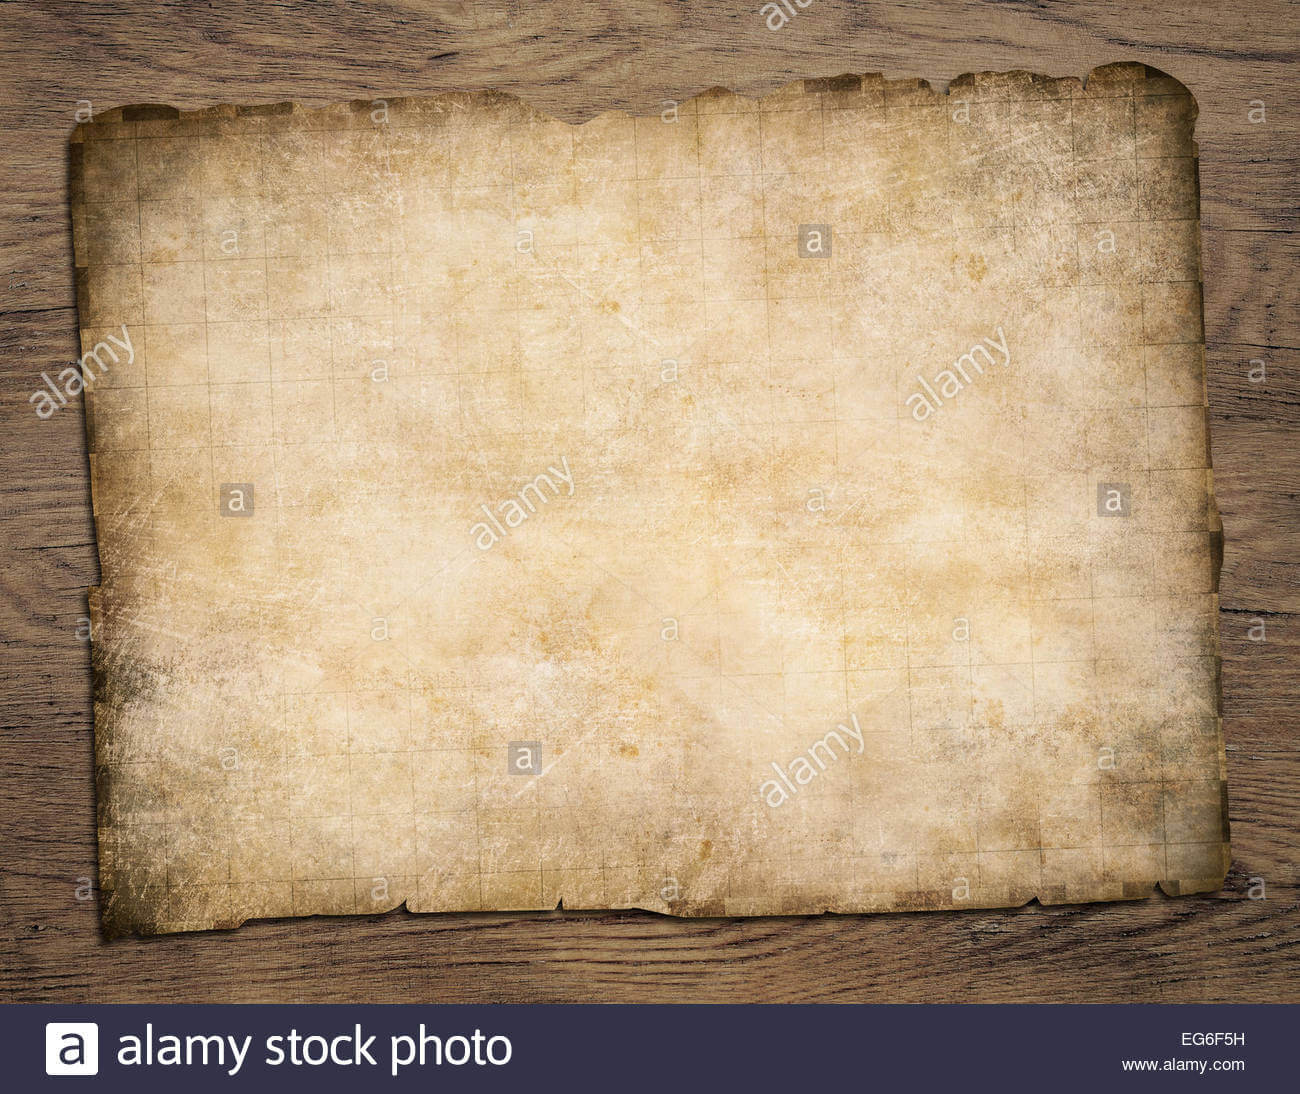 Old Blank Parchment Treasure Map On Wooden Table Stock Photo With Blank Pirate Map Template